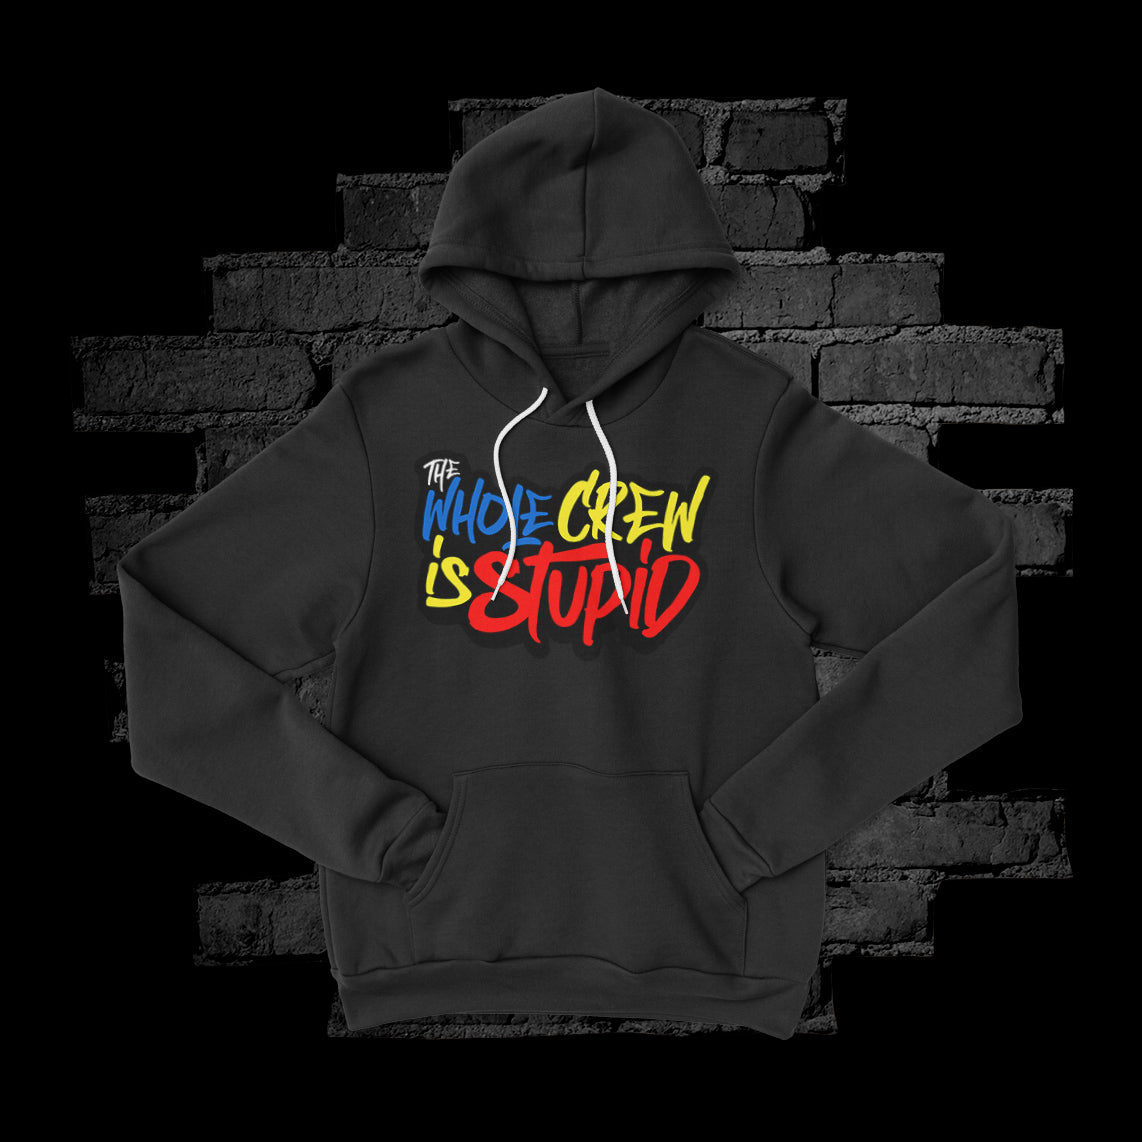 The Whole Crew is Stupid Hoodie